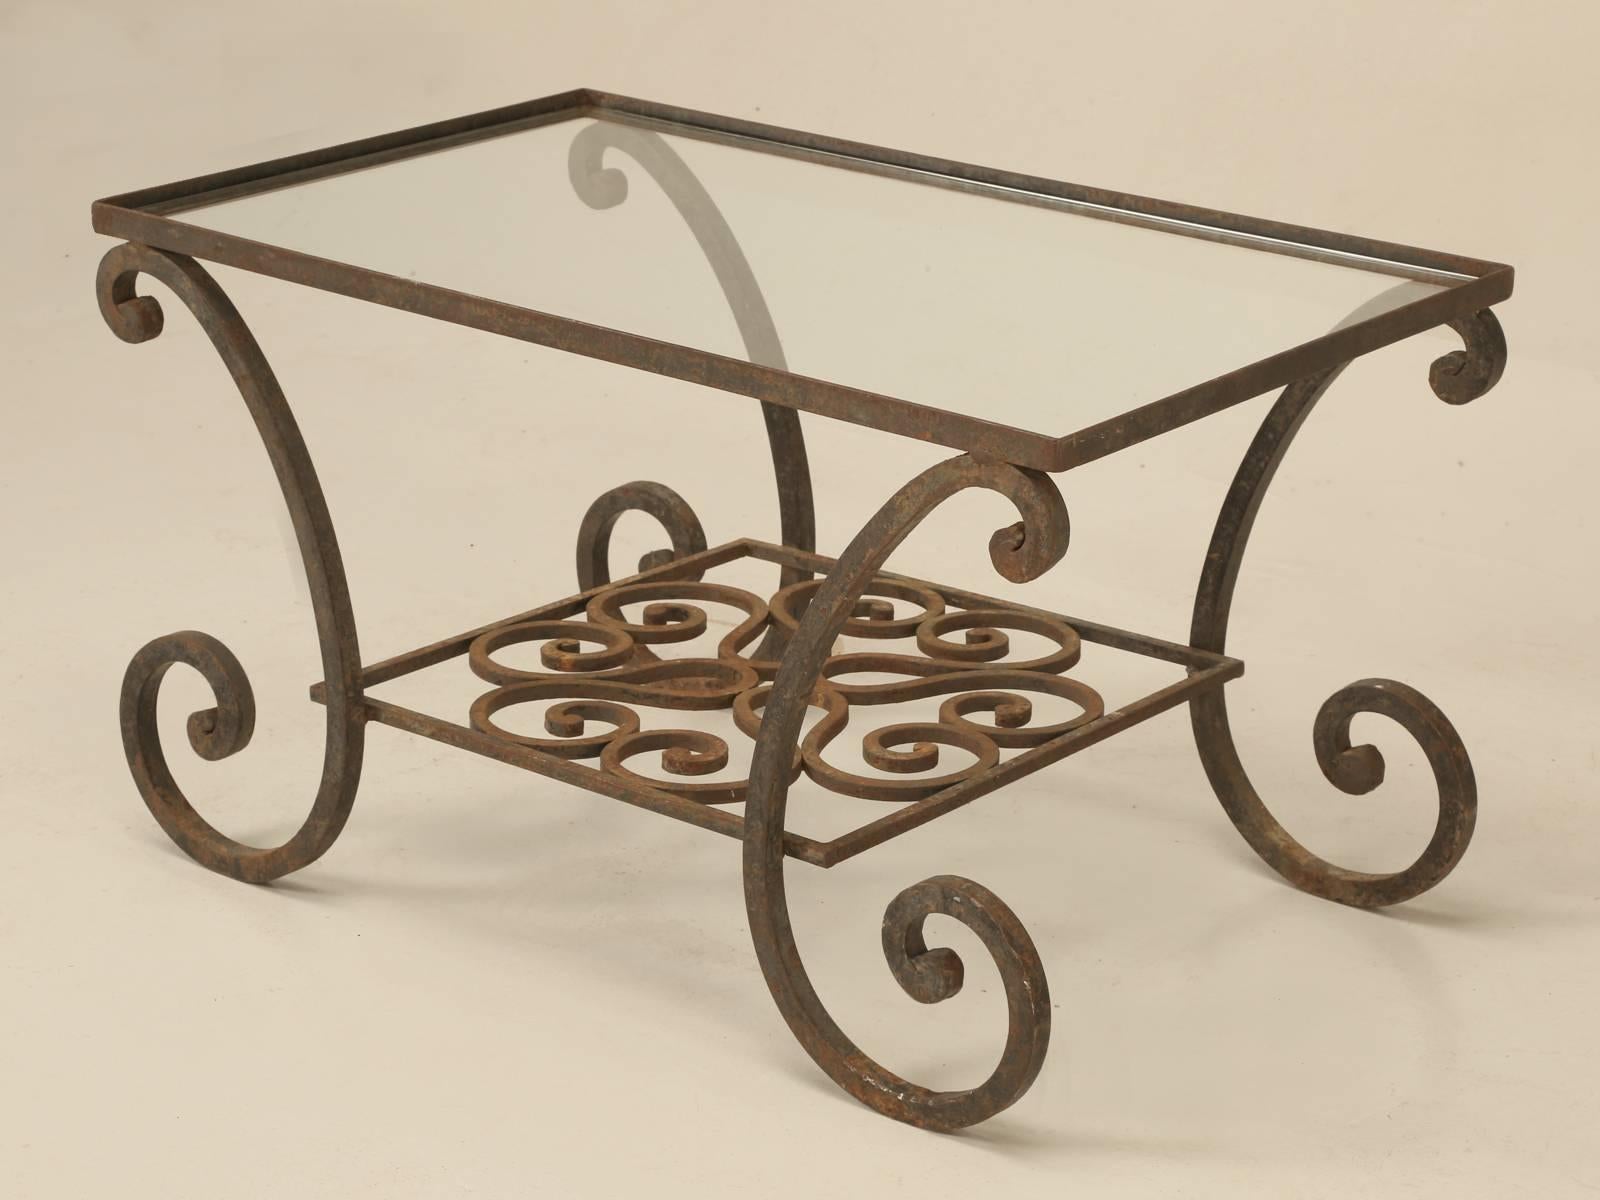 French hand-wrought iron coffee table, that could be used indoors or outdoors as you like. Very nice original patina and probably made in the 1950s or 1960s.